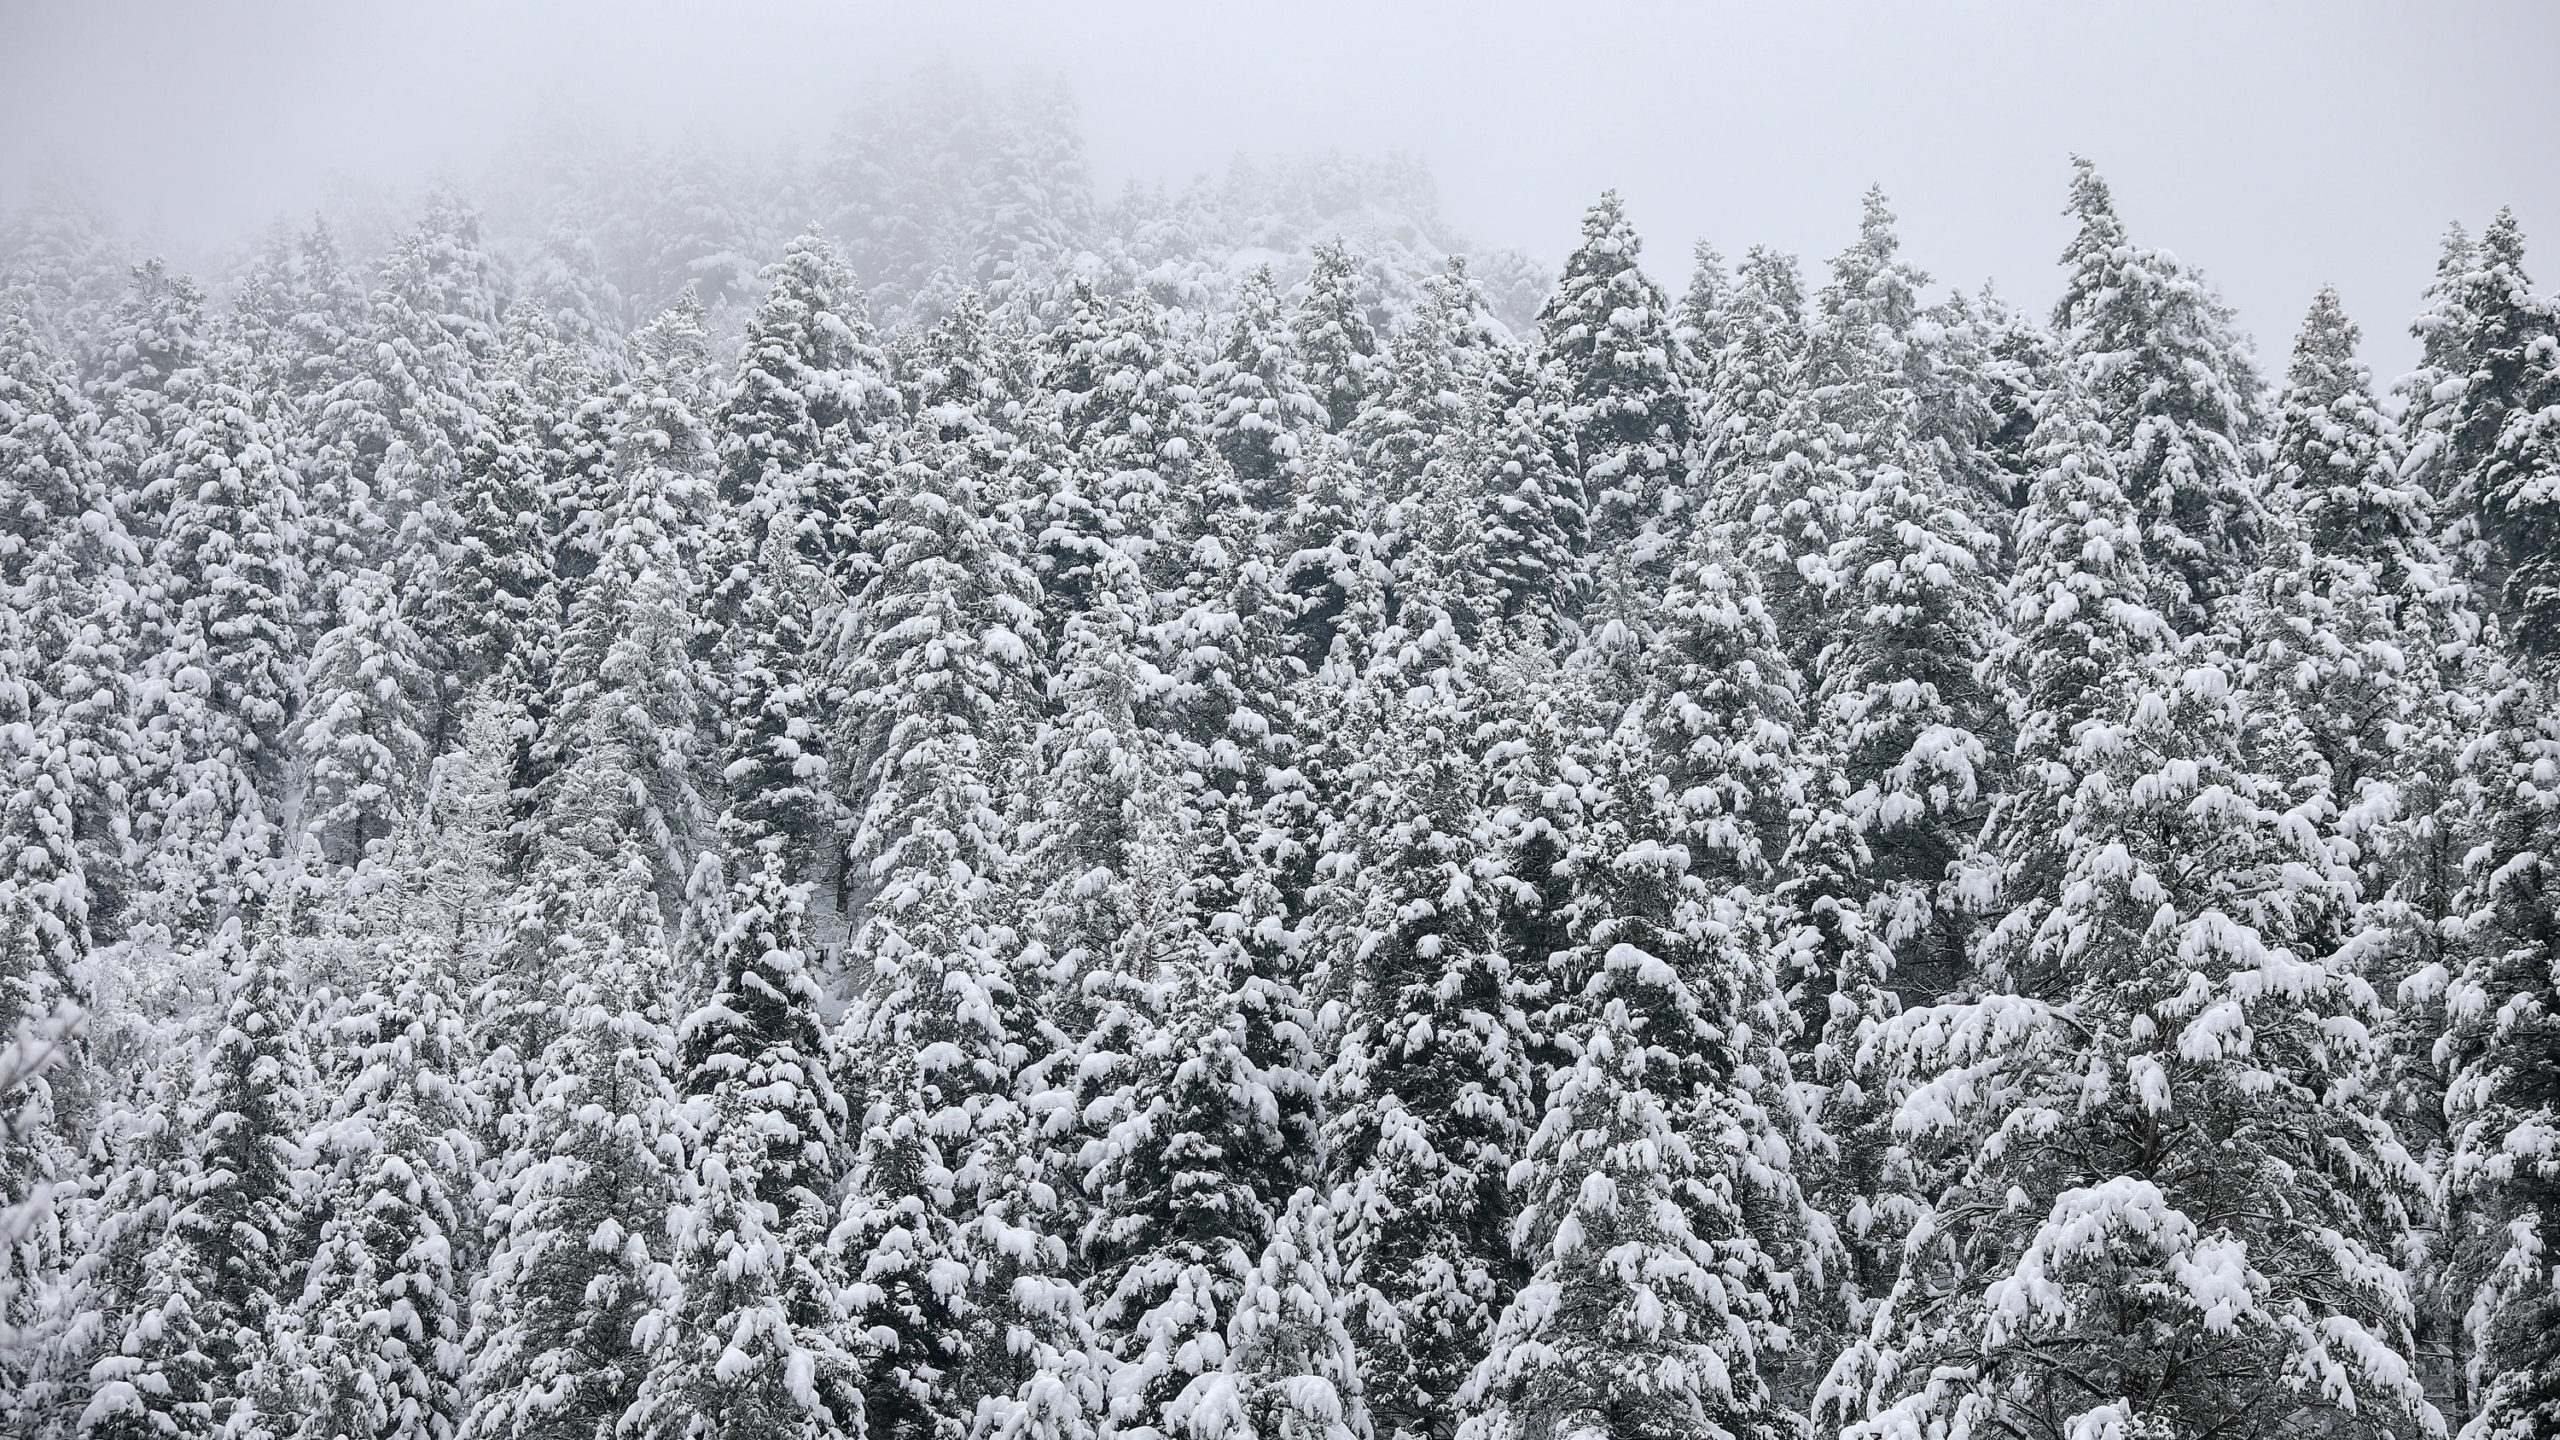 snowy trees pictured, we're set to break a snow water record...